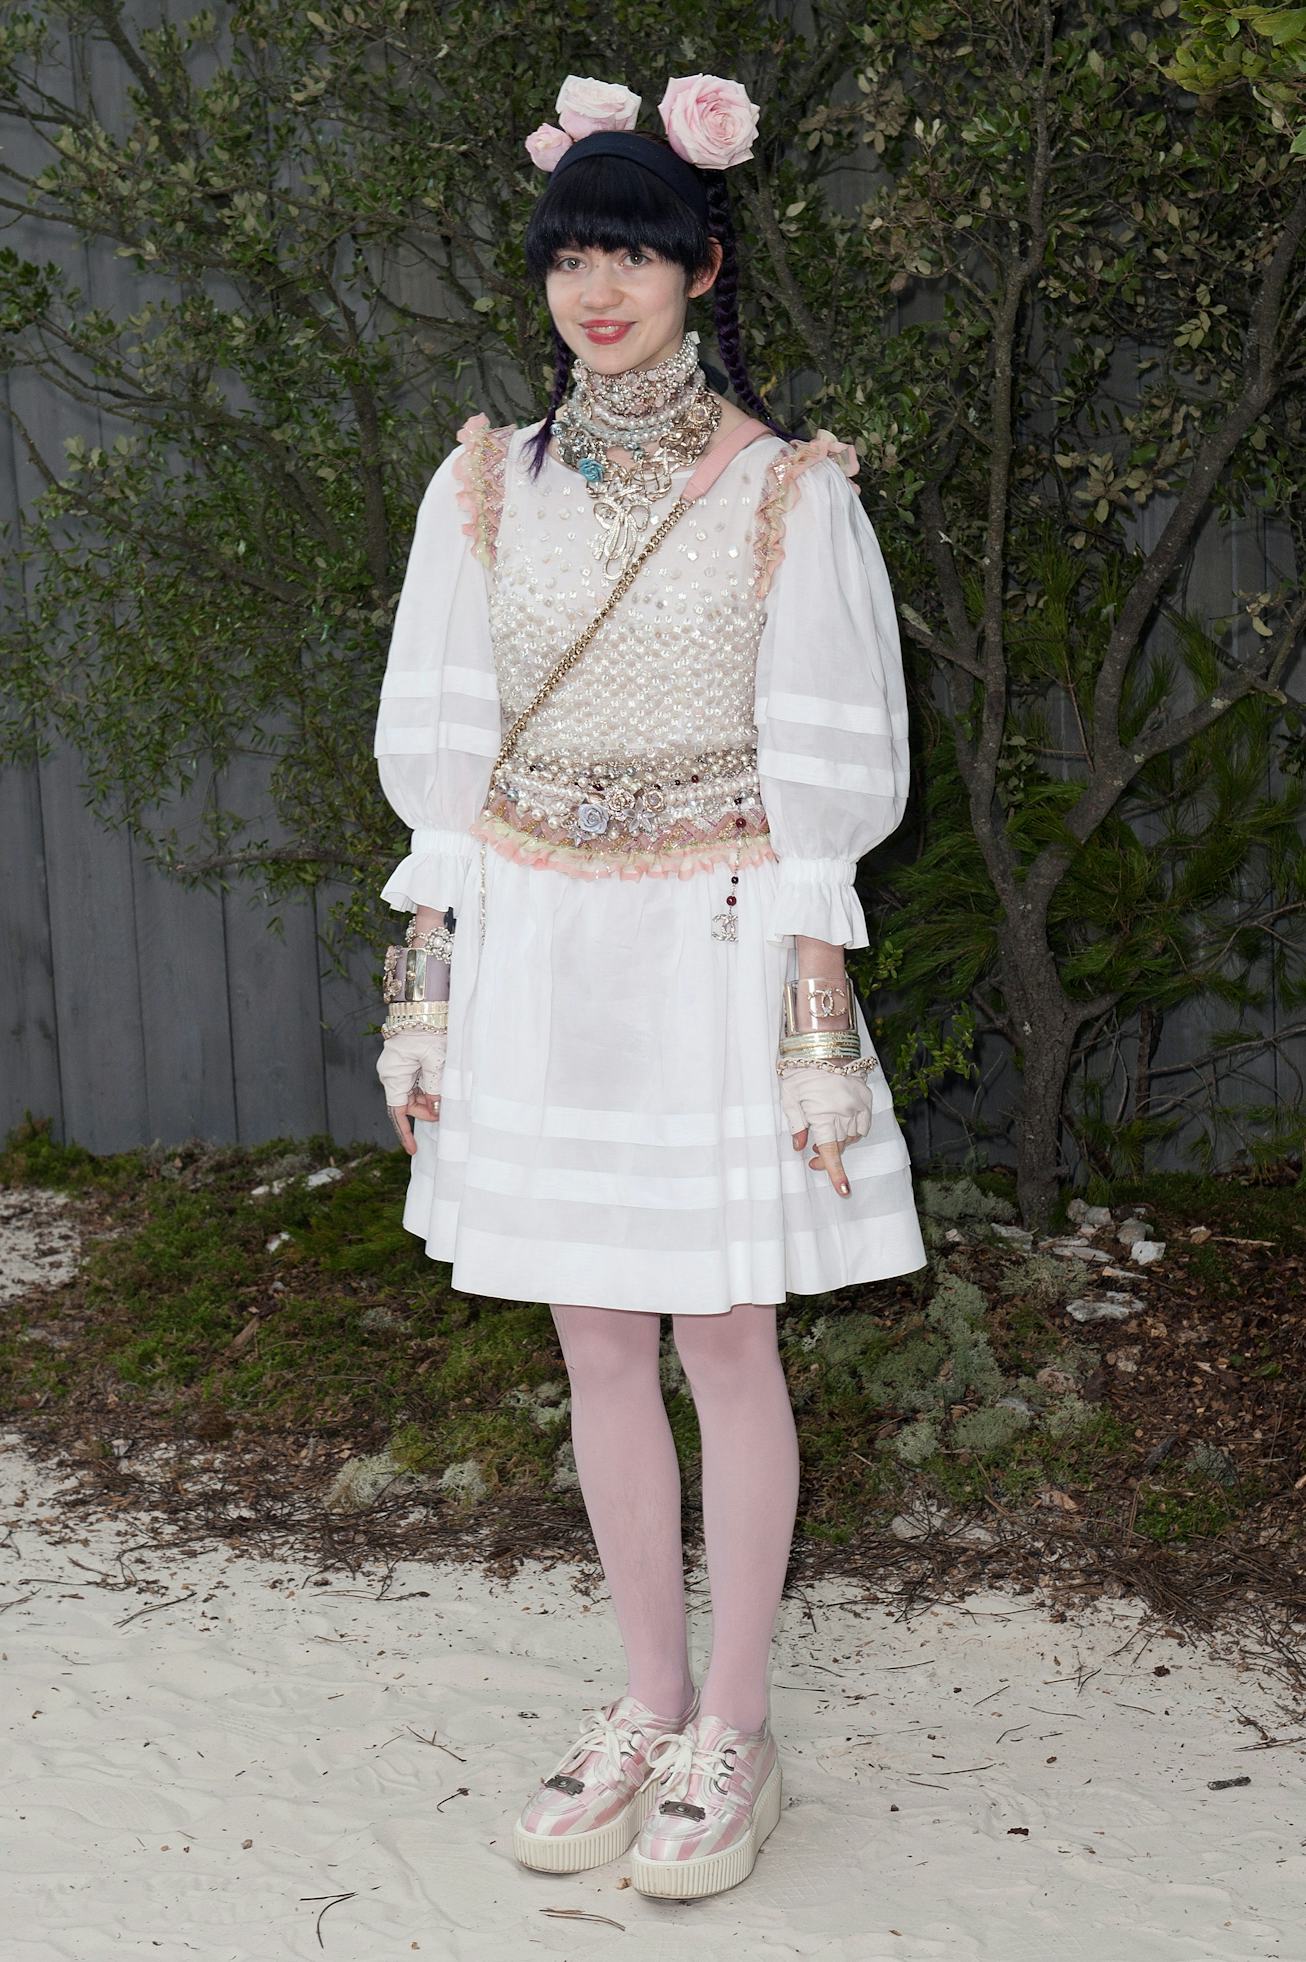 Grimes attends the Chanel Spring/Summer 2013 Haute-Couture show in 2013.